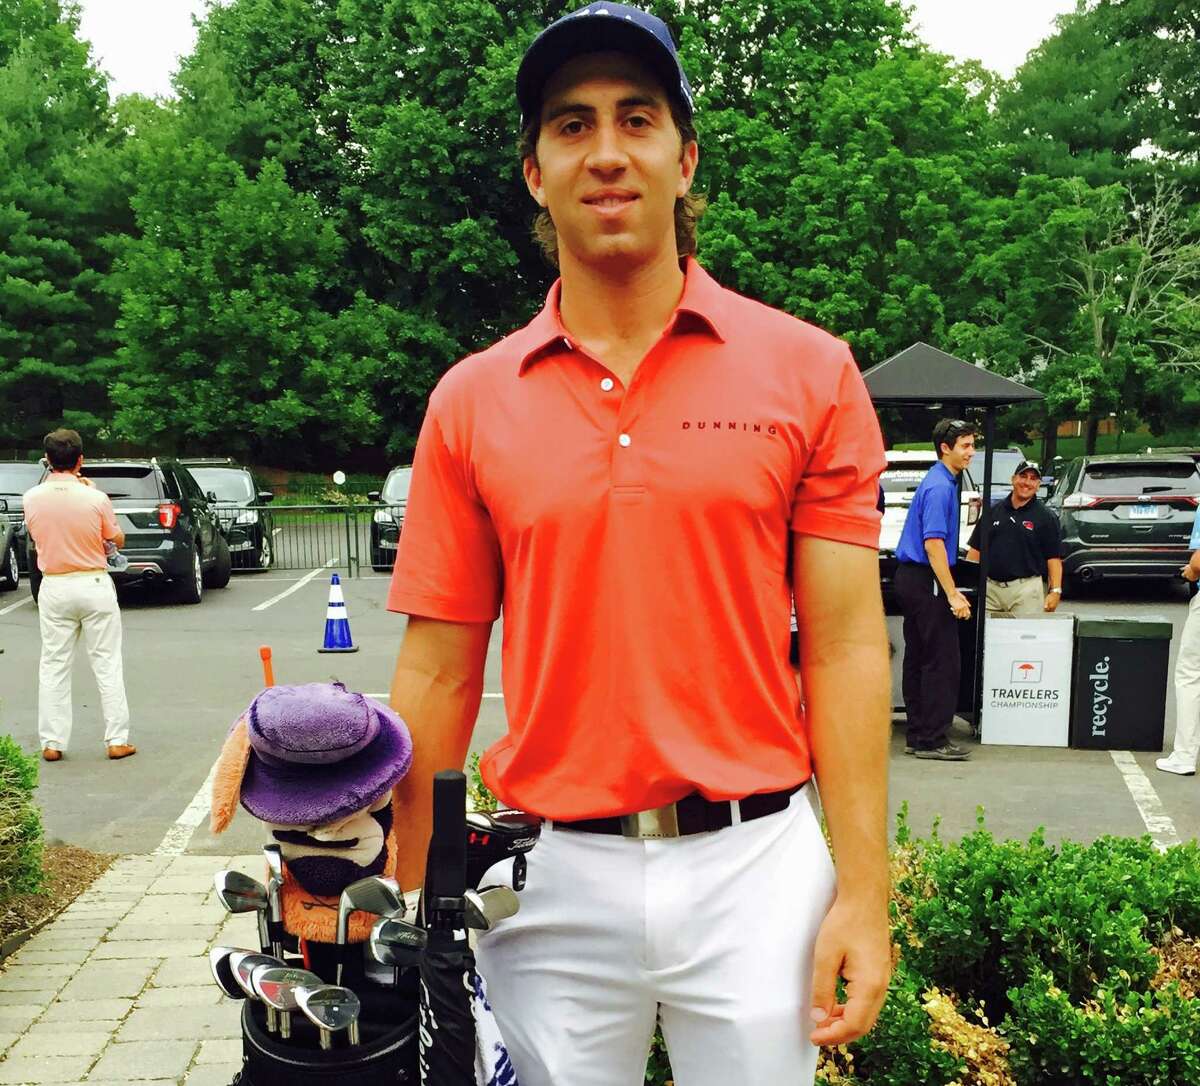 David Pastore of Greenwich shot an even-par 70 at the Travelers Championship in his PGA Tour debut on June 25, 2015. Pastore is in the field for the Metropolitan Golf Association Met Open Championship beginning Monday.